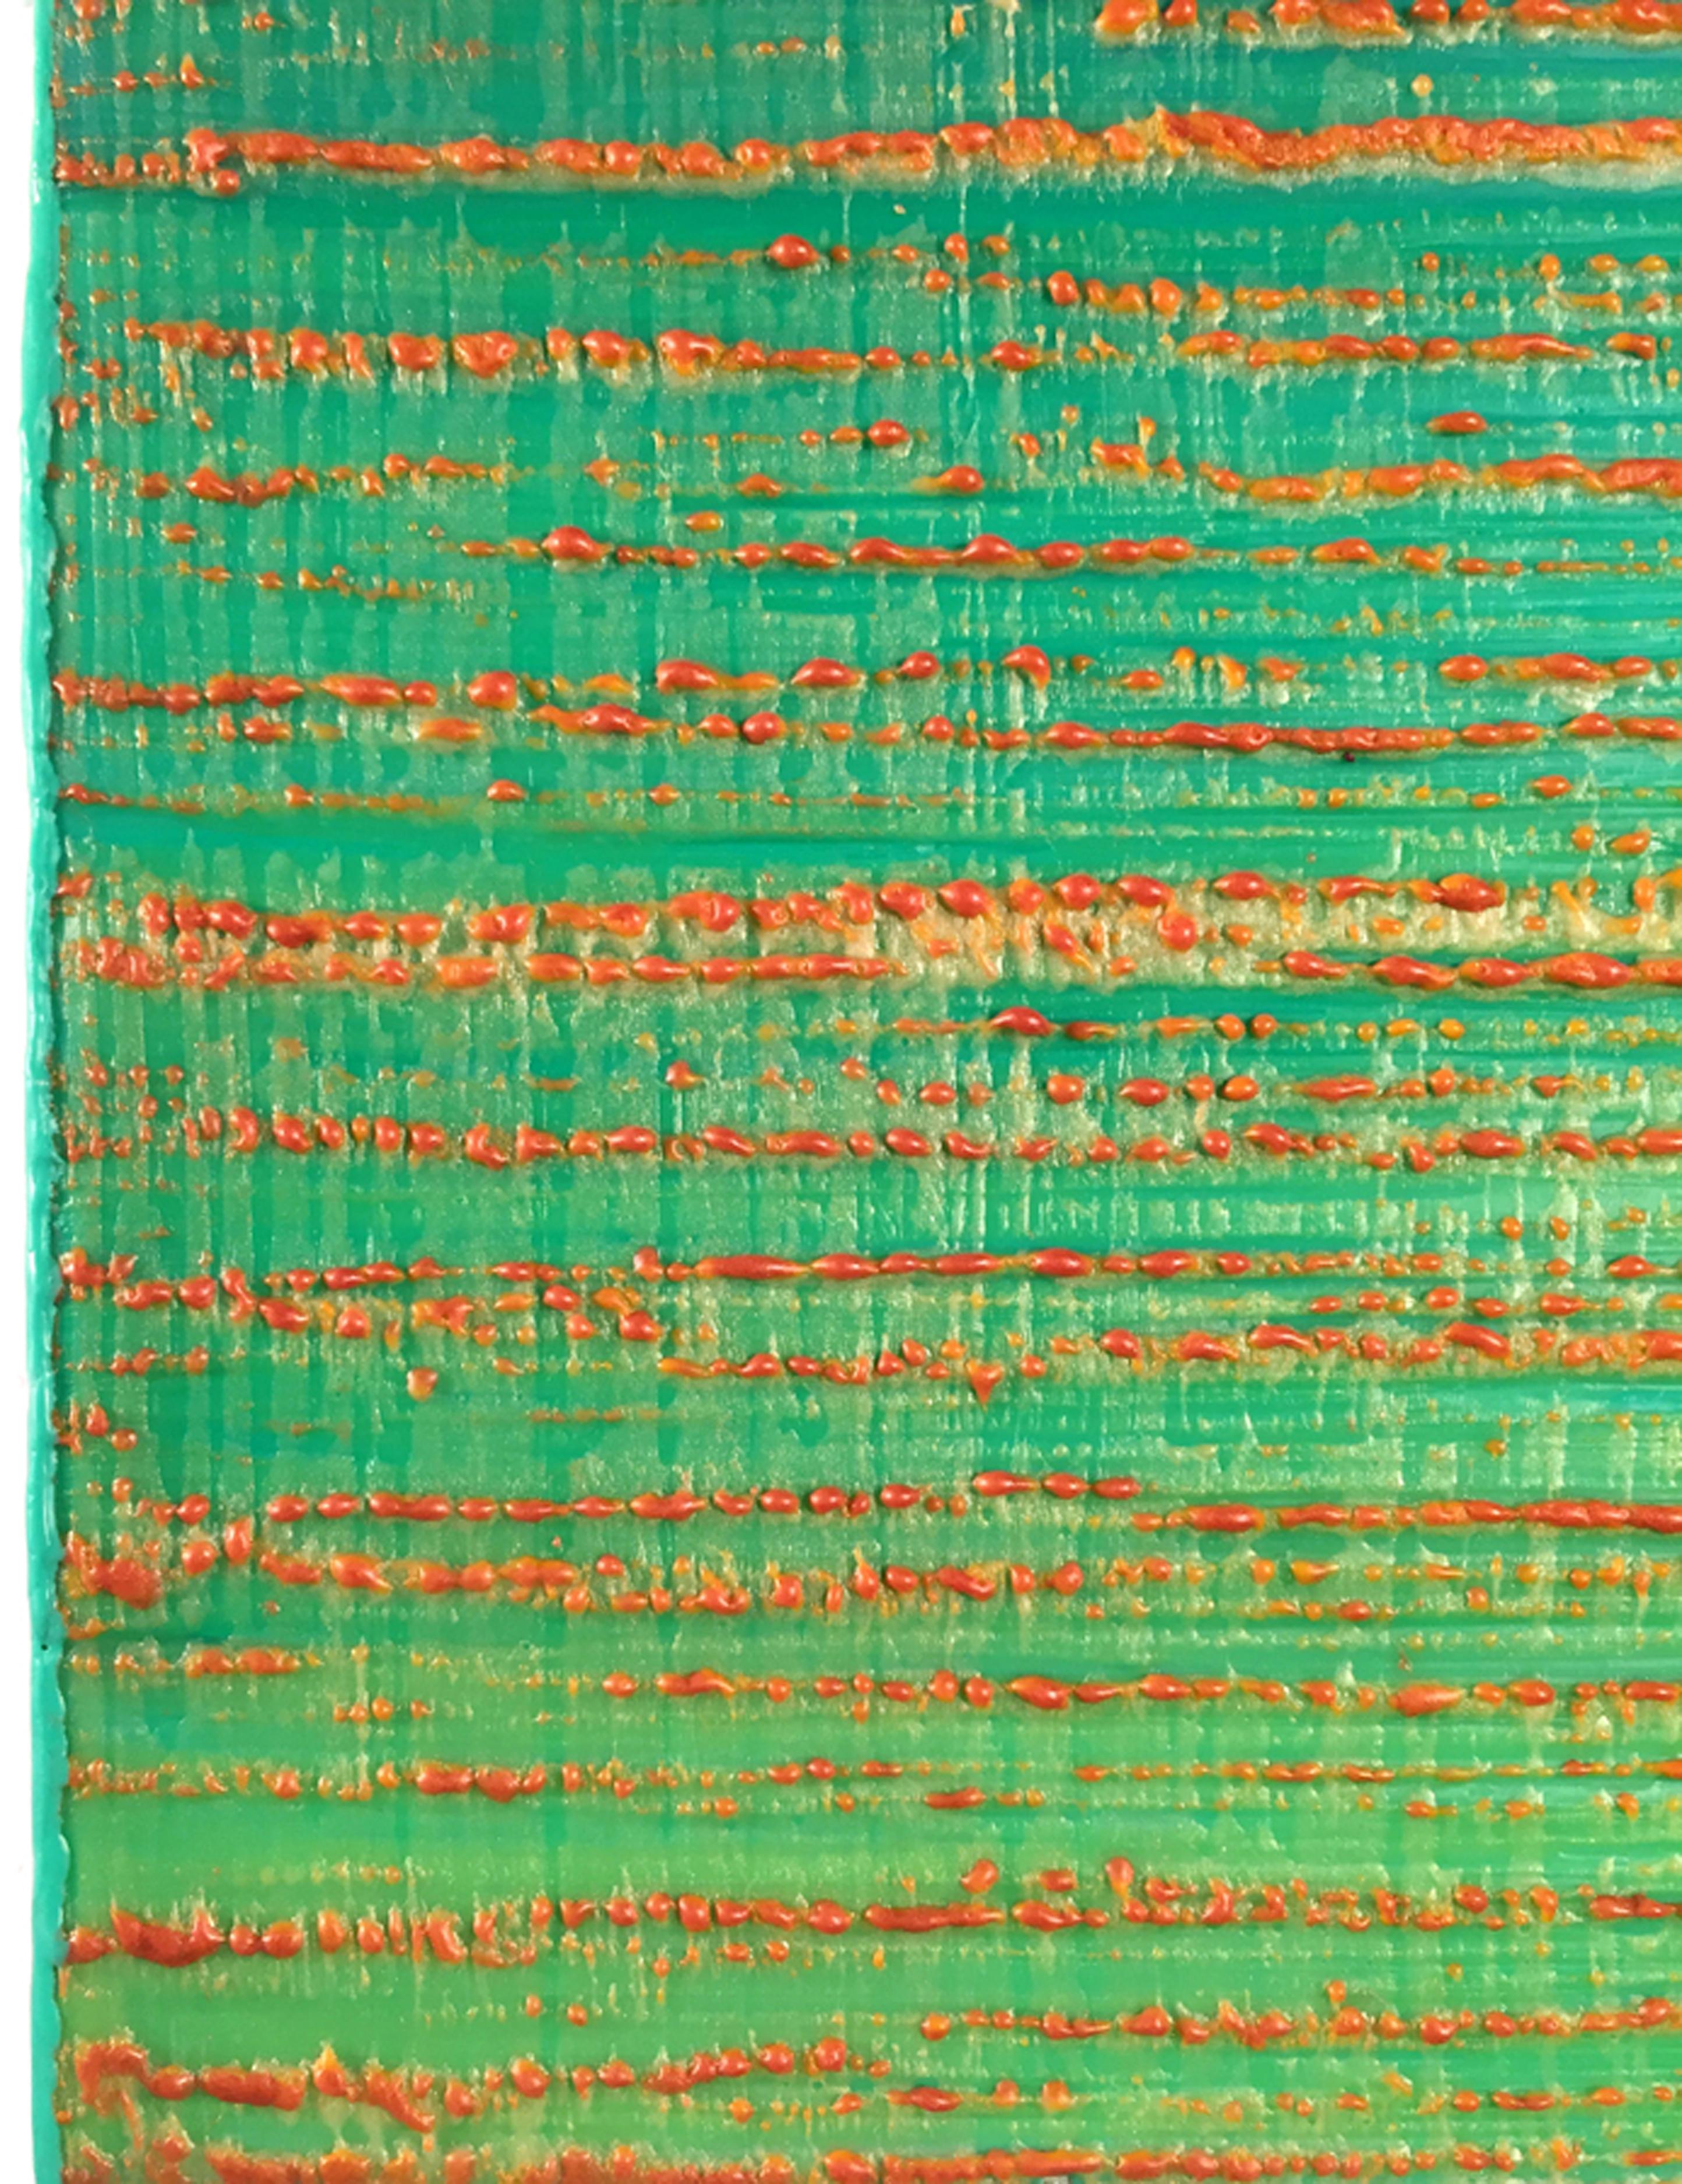 Silk Road 450, 2019, encaustic on panel, 12 x 12 x 2 inches For Sale 1